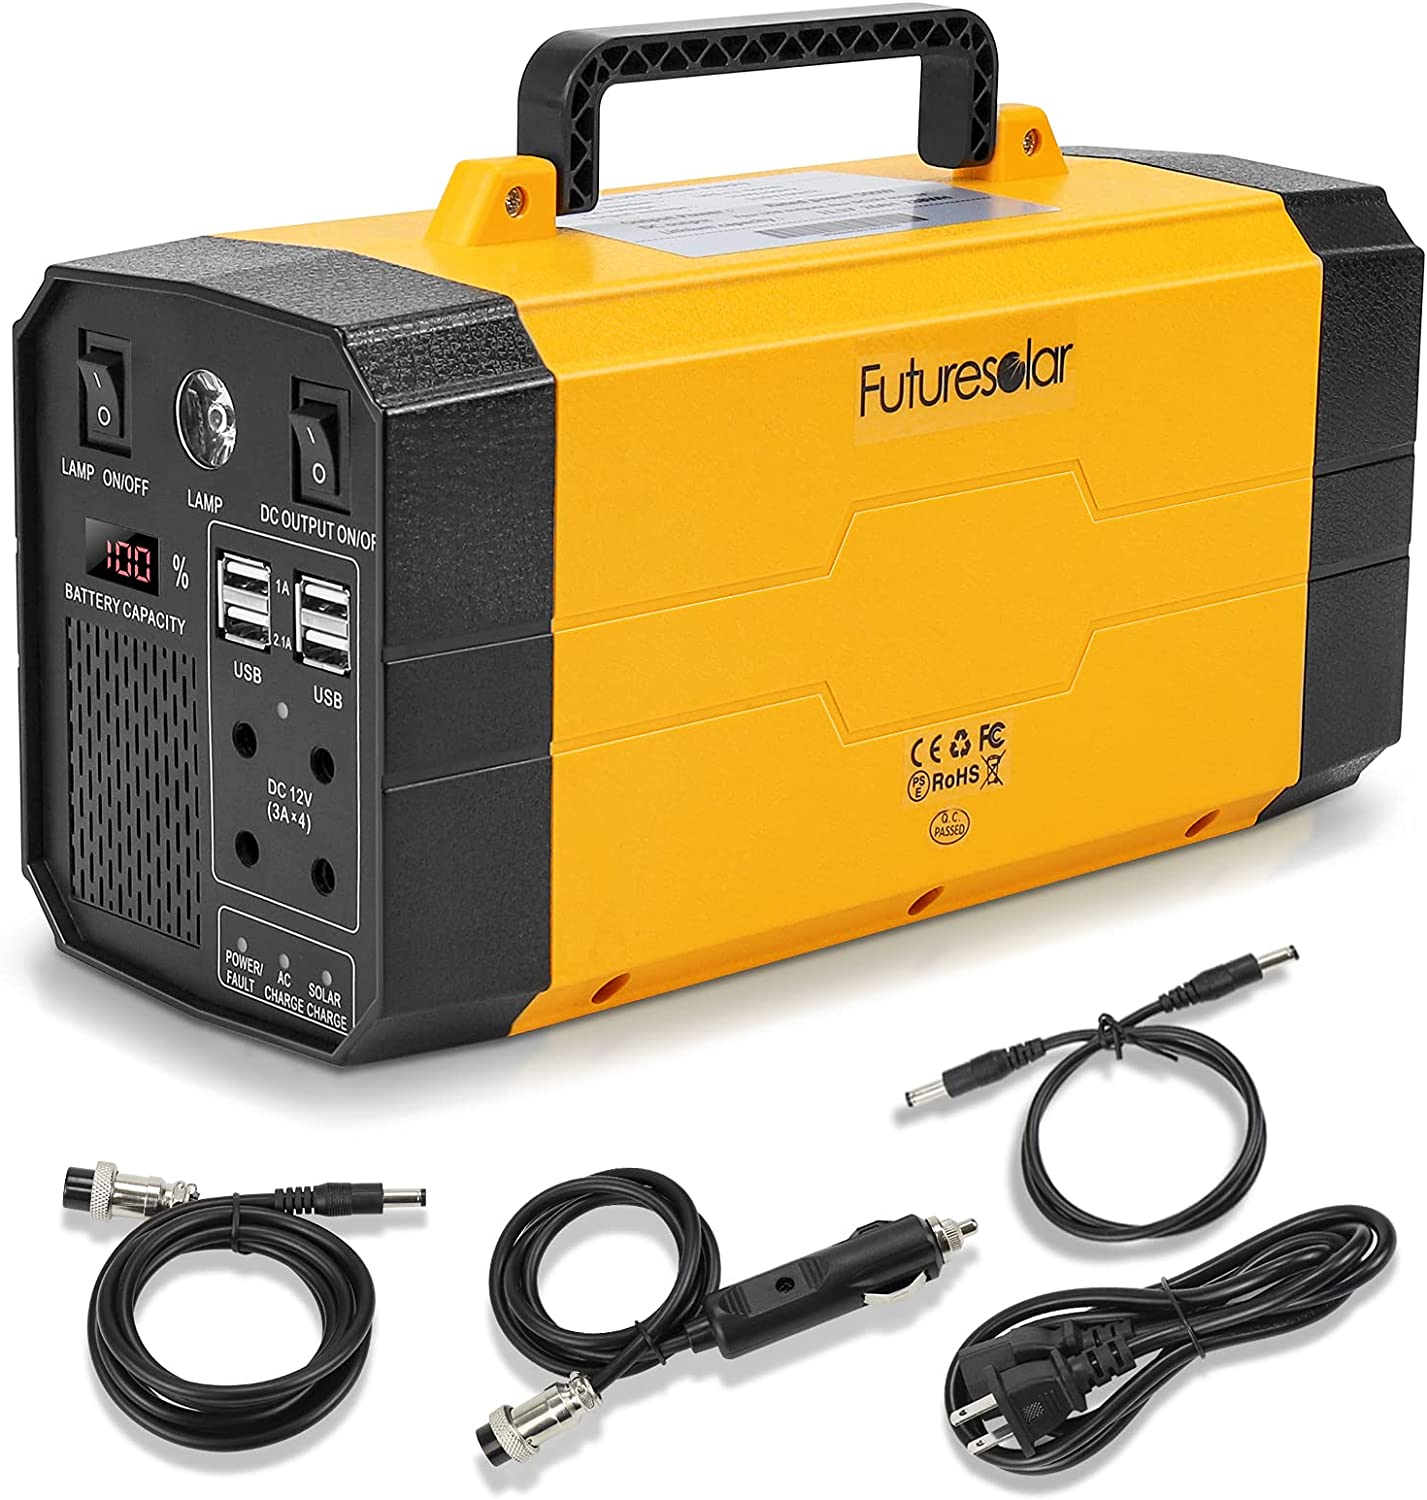 500W Portable Power Station,Solar Generator with 110V AC Outlet/2 DC Ports/4 USB Ports, Backup Battery Pack Power Supply for Outdoor Adventure Load Trip Camping Fishin Emergency